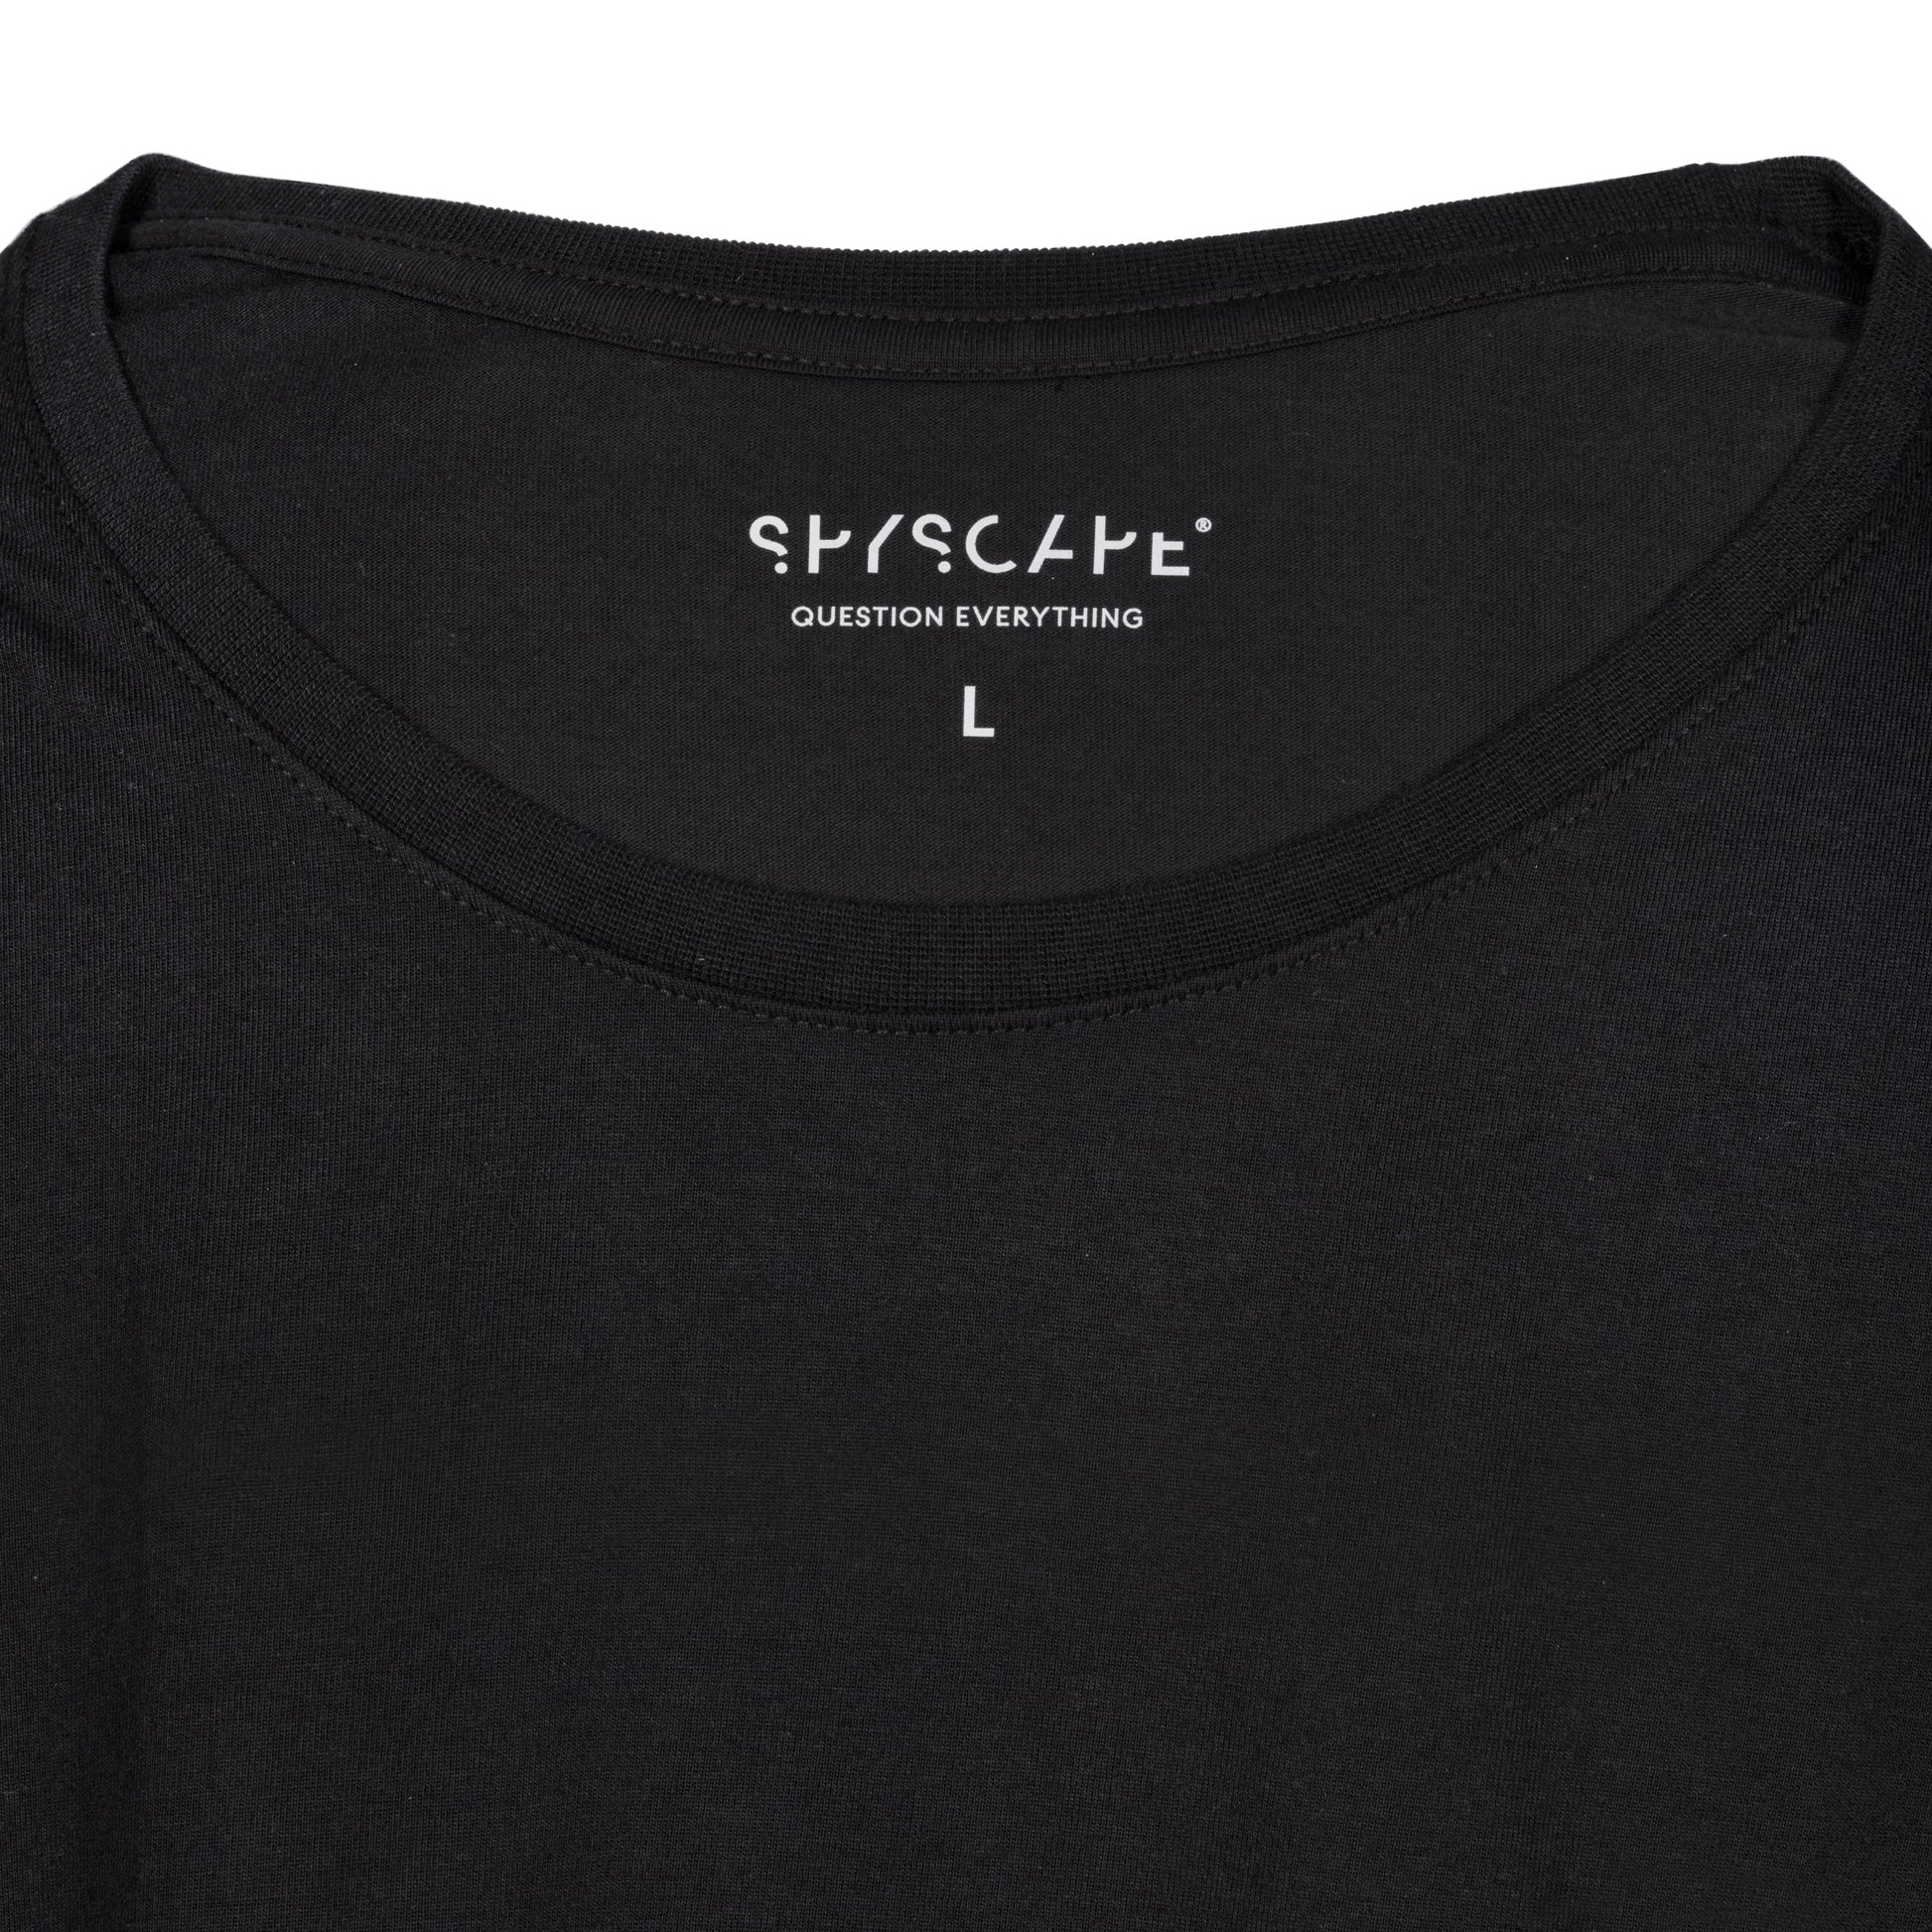 SPYSCAPE Hacker T- Shirt with Hidden Zip Pocket - inner neck print SPYSCAPE Question Everything and size